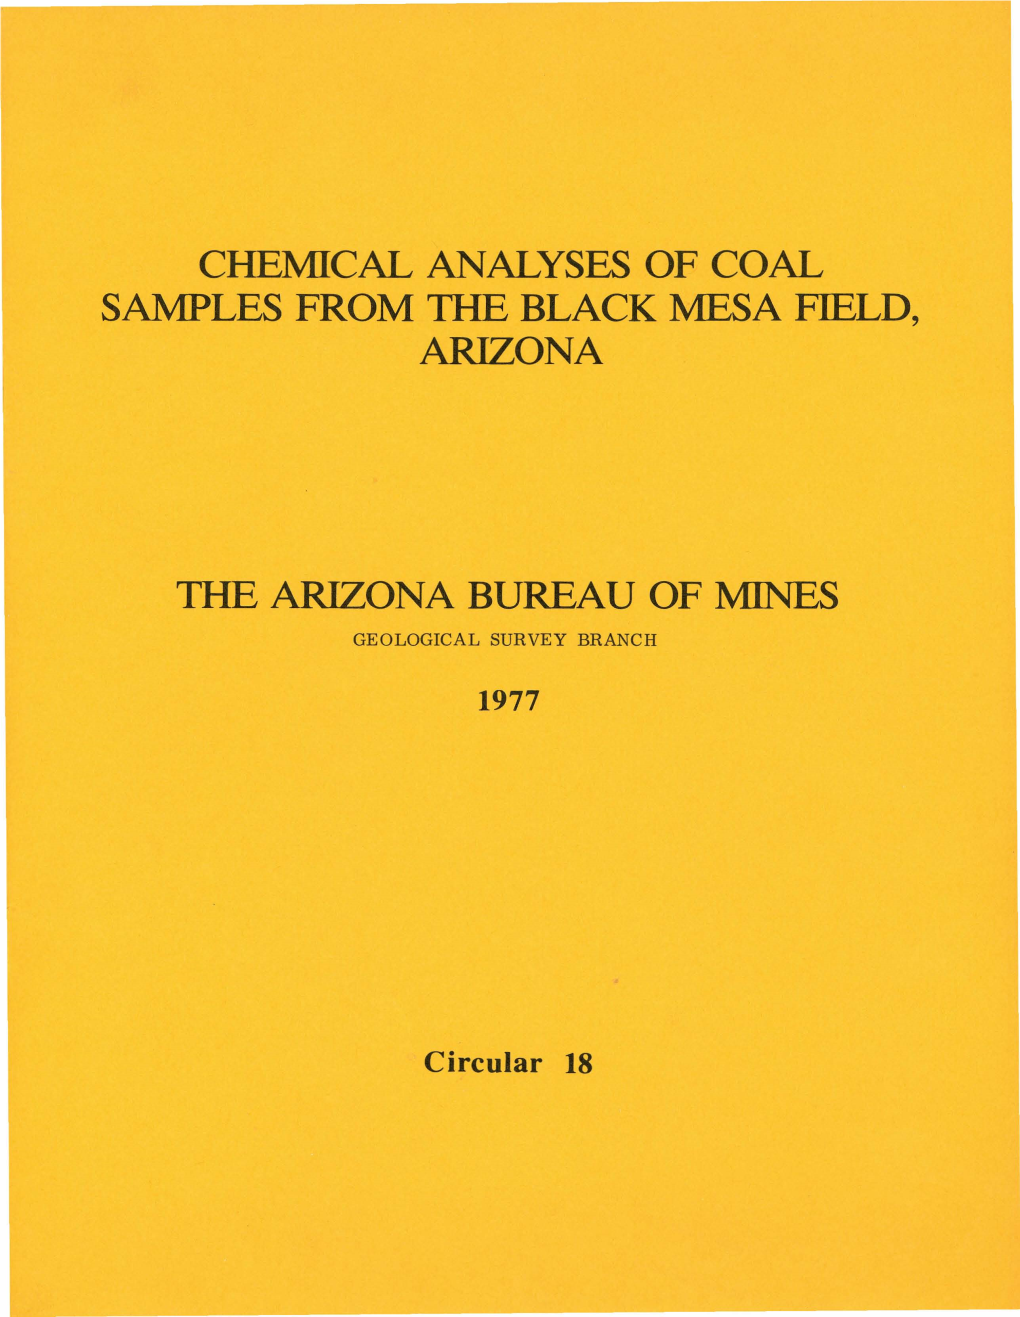 Chemical Analyses of Coal Samples from the Black Mesa Field, Arizona